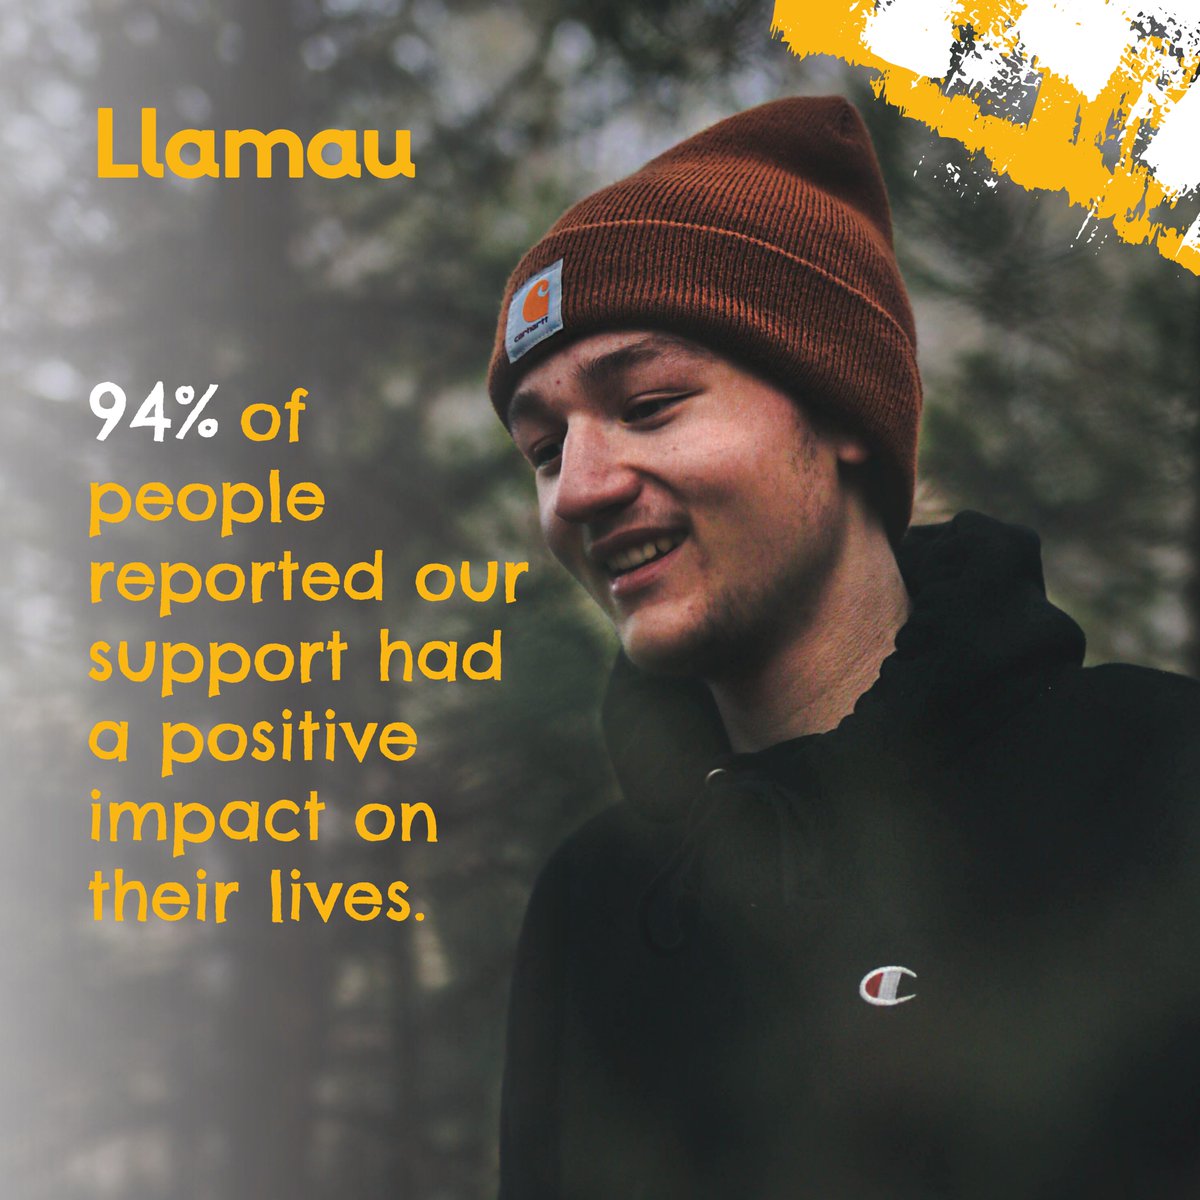 94% of people reported our support had a positive impact on their lives. This wouldn't be possible without your help. You can view all the details on how we are working to create a Wales without homelessness, with your help here: ow.ly/mUe650QKE6Y